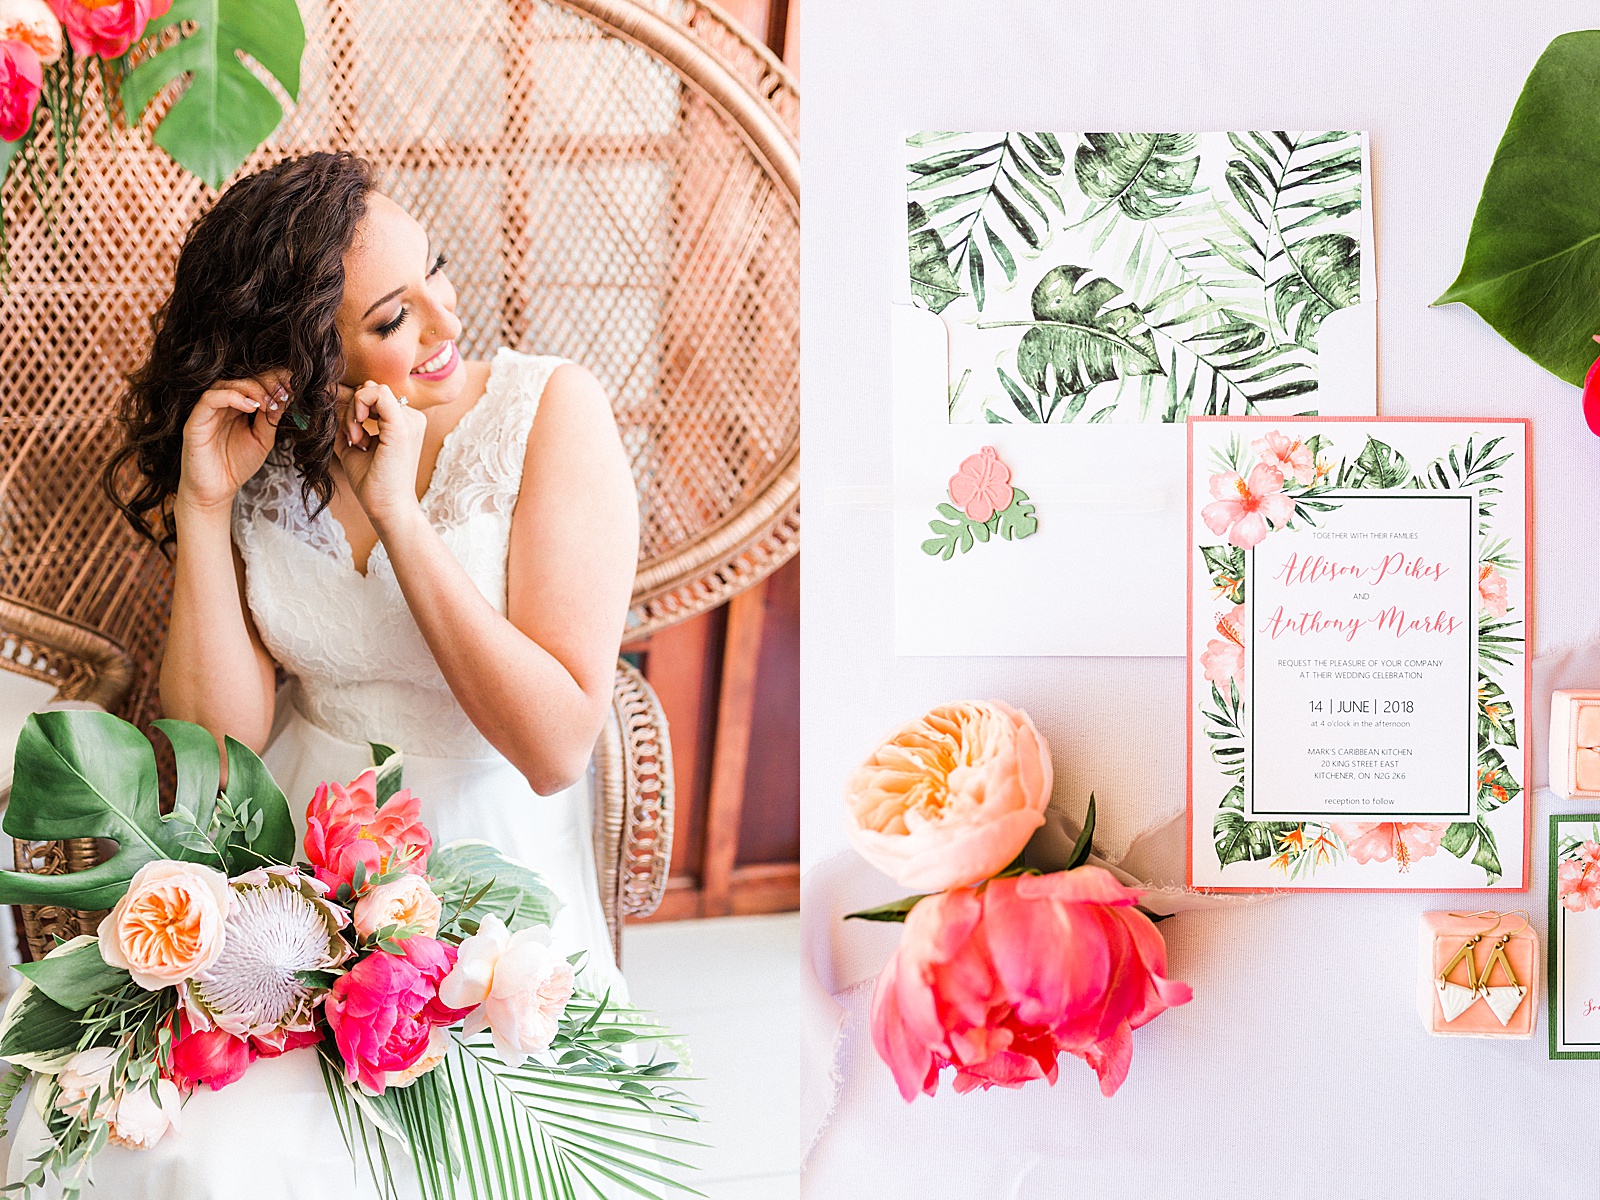 Tropical wicker chair and tropical wedding invitations